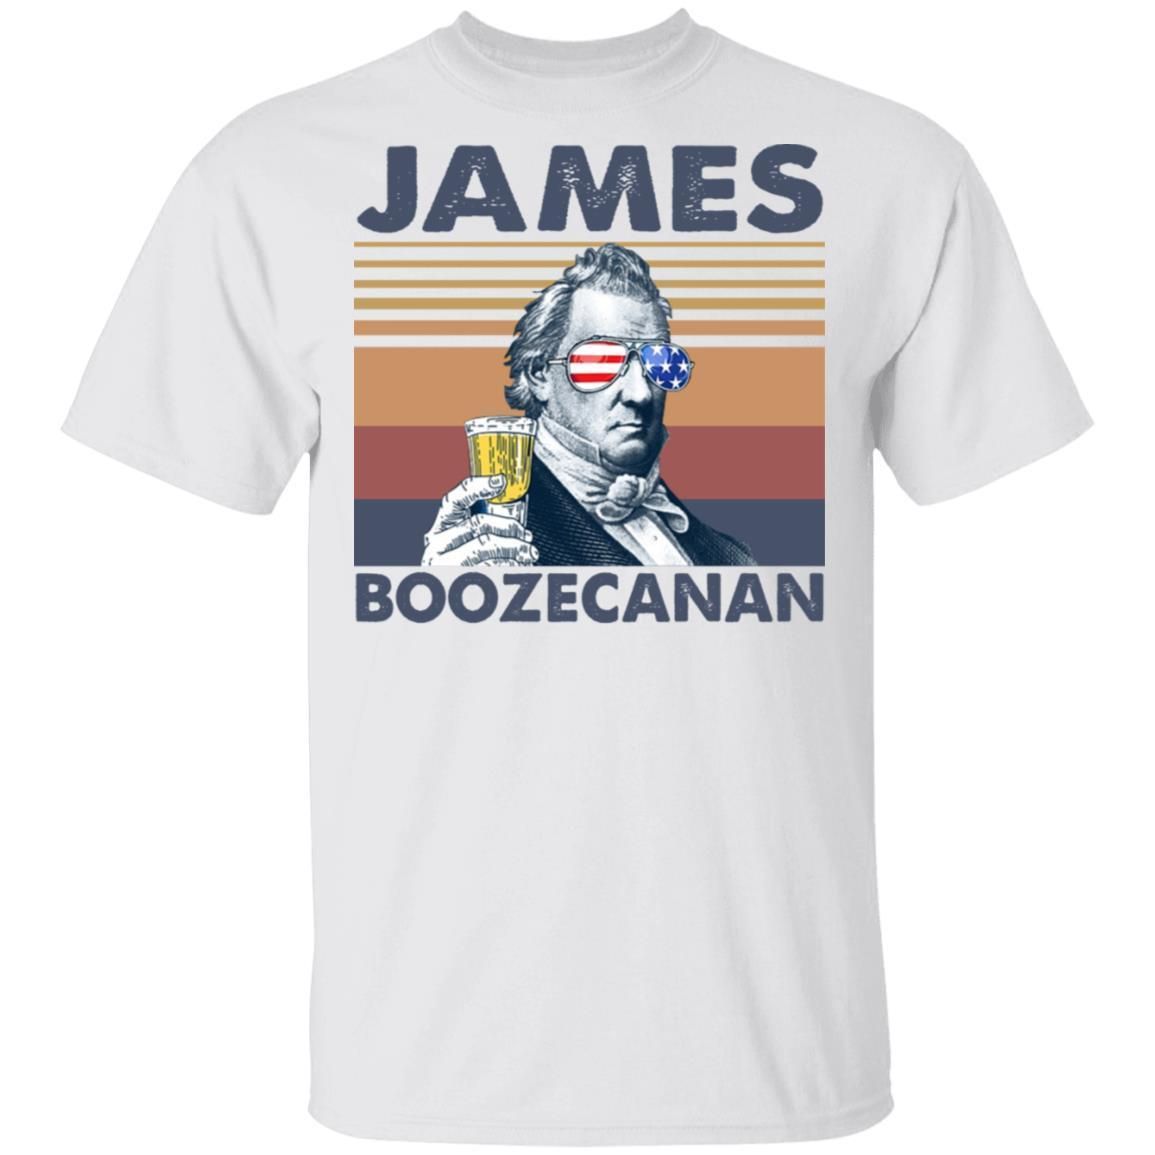 James Boozecanan shirts Funny Drink 4th of July